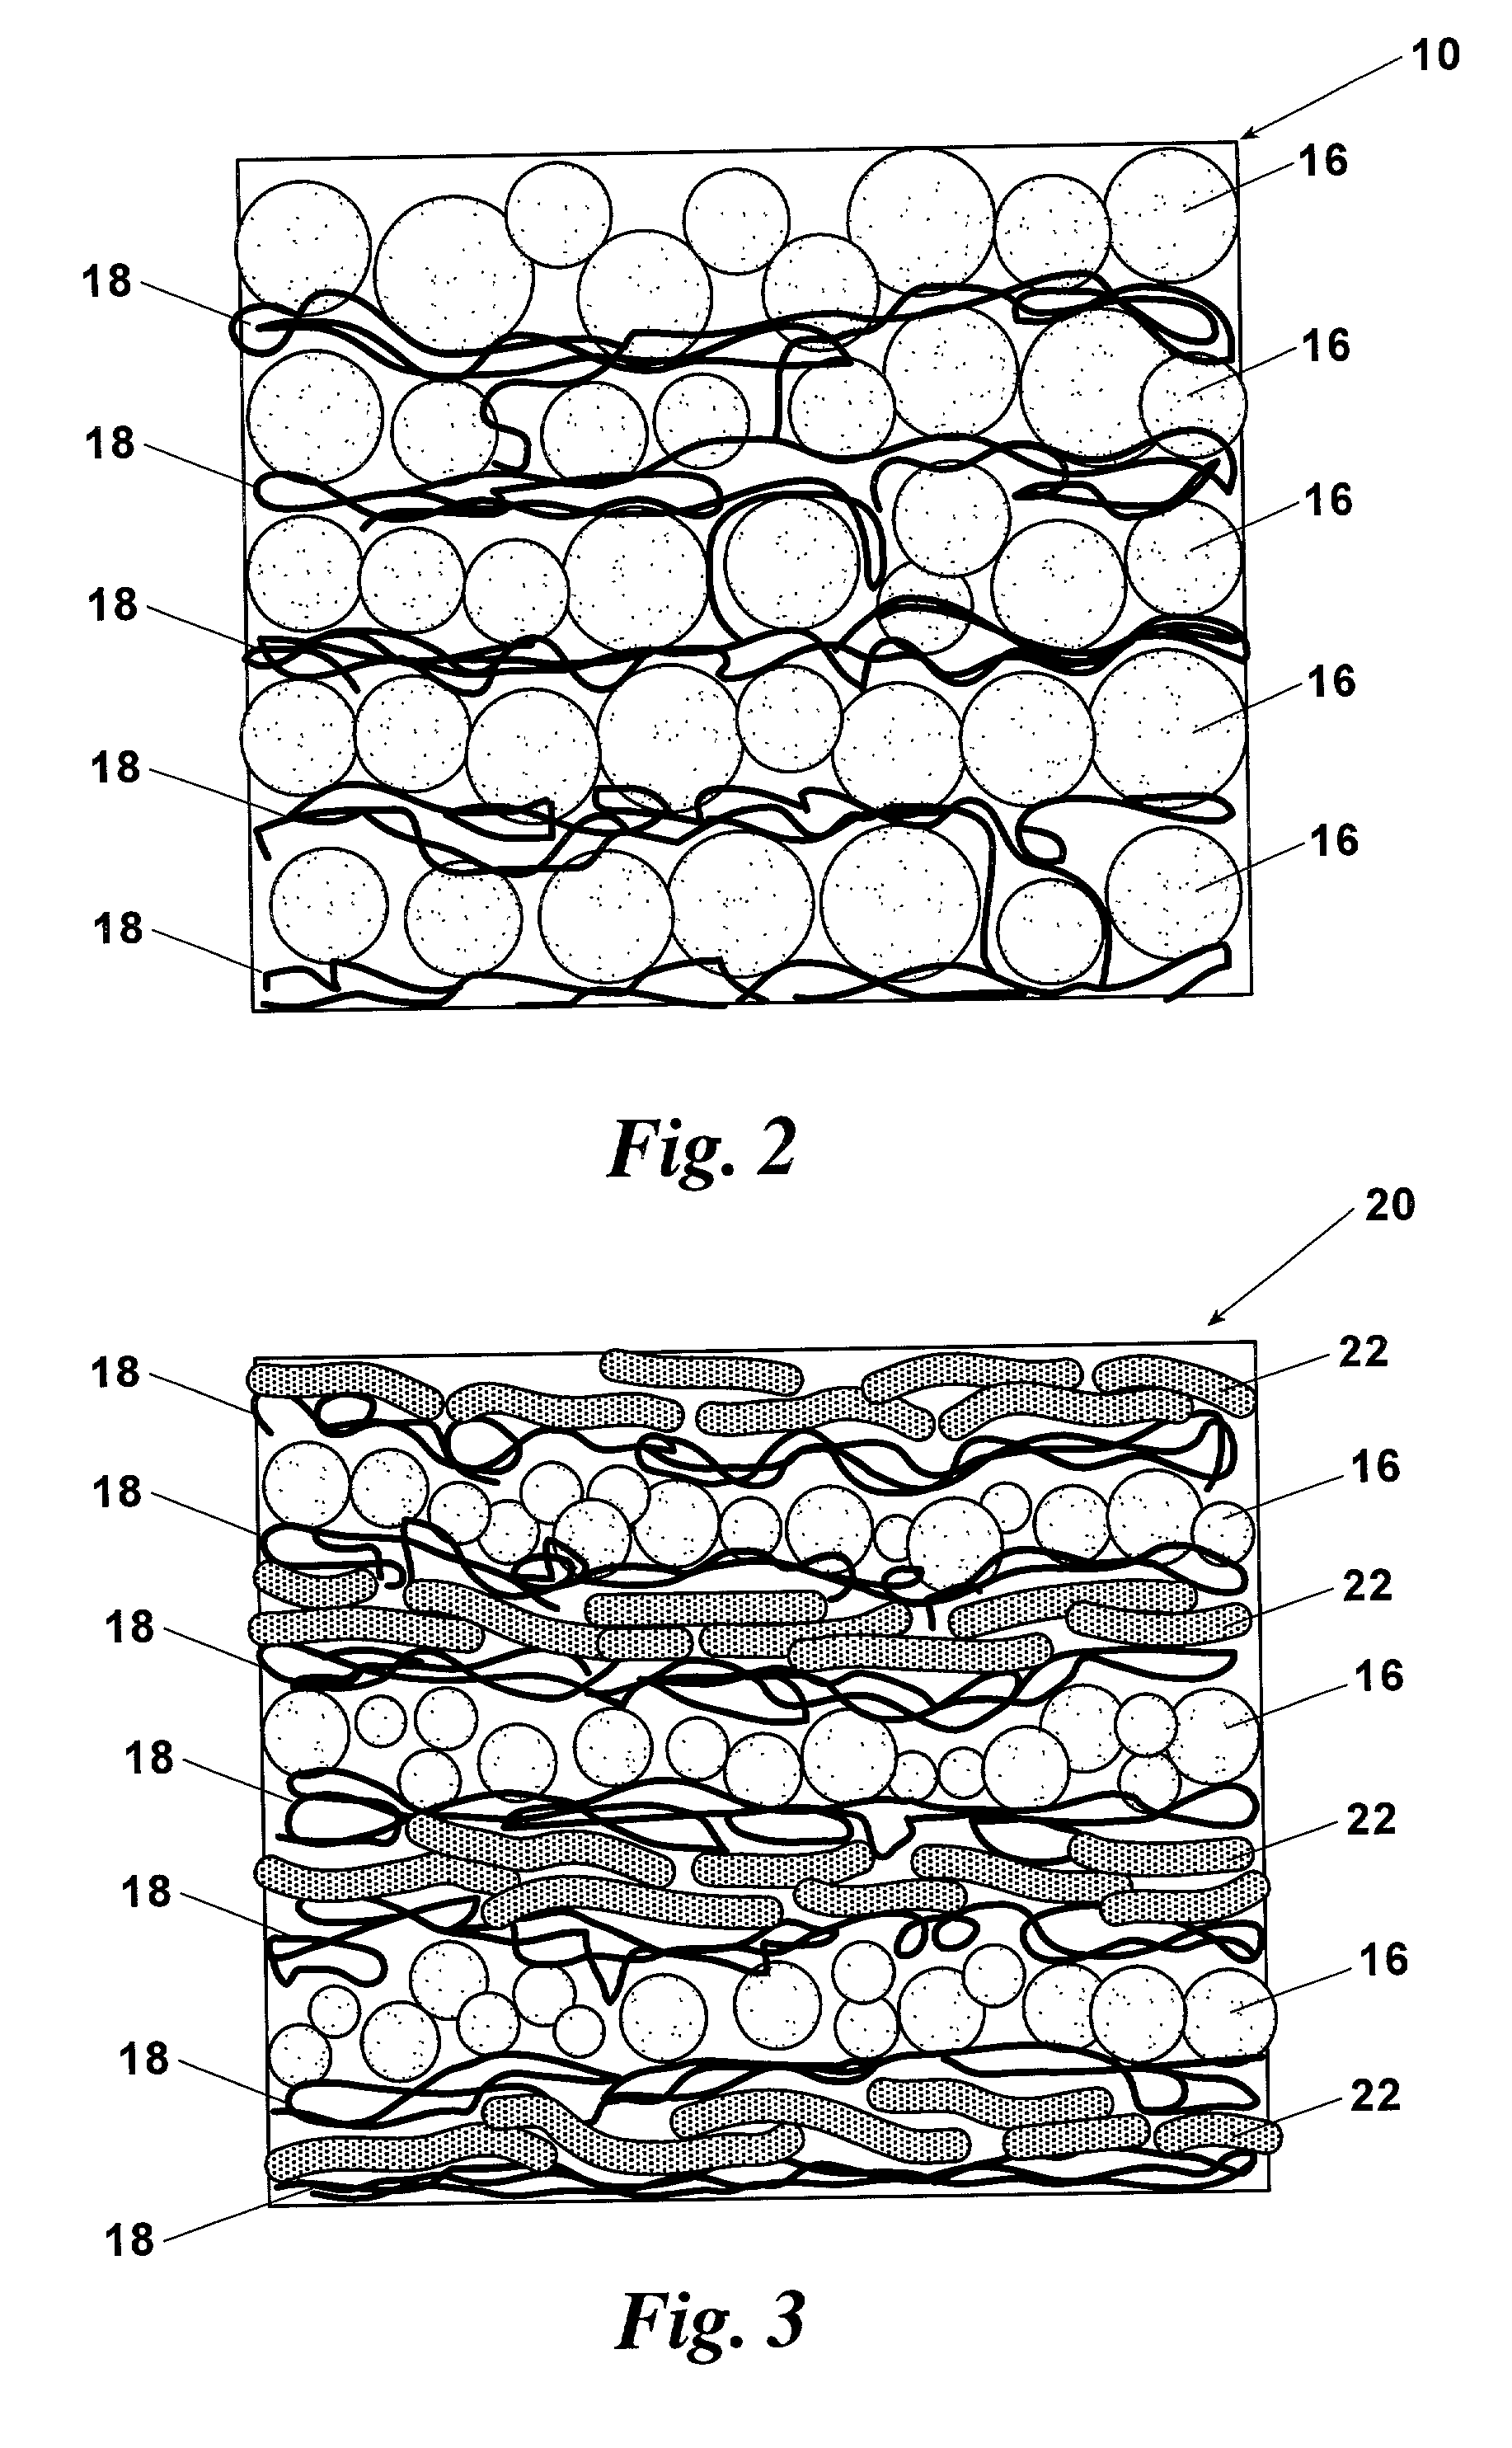 Assembly of free-standing films using a layer-by-layer process